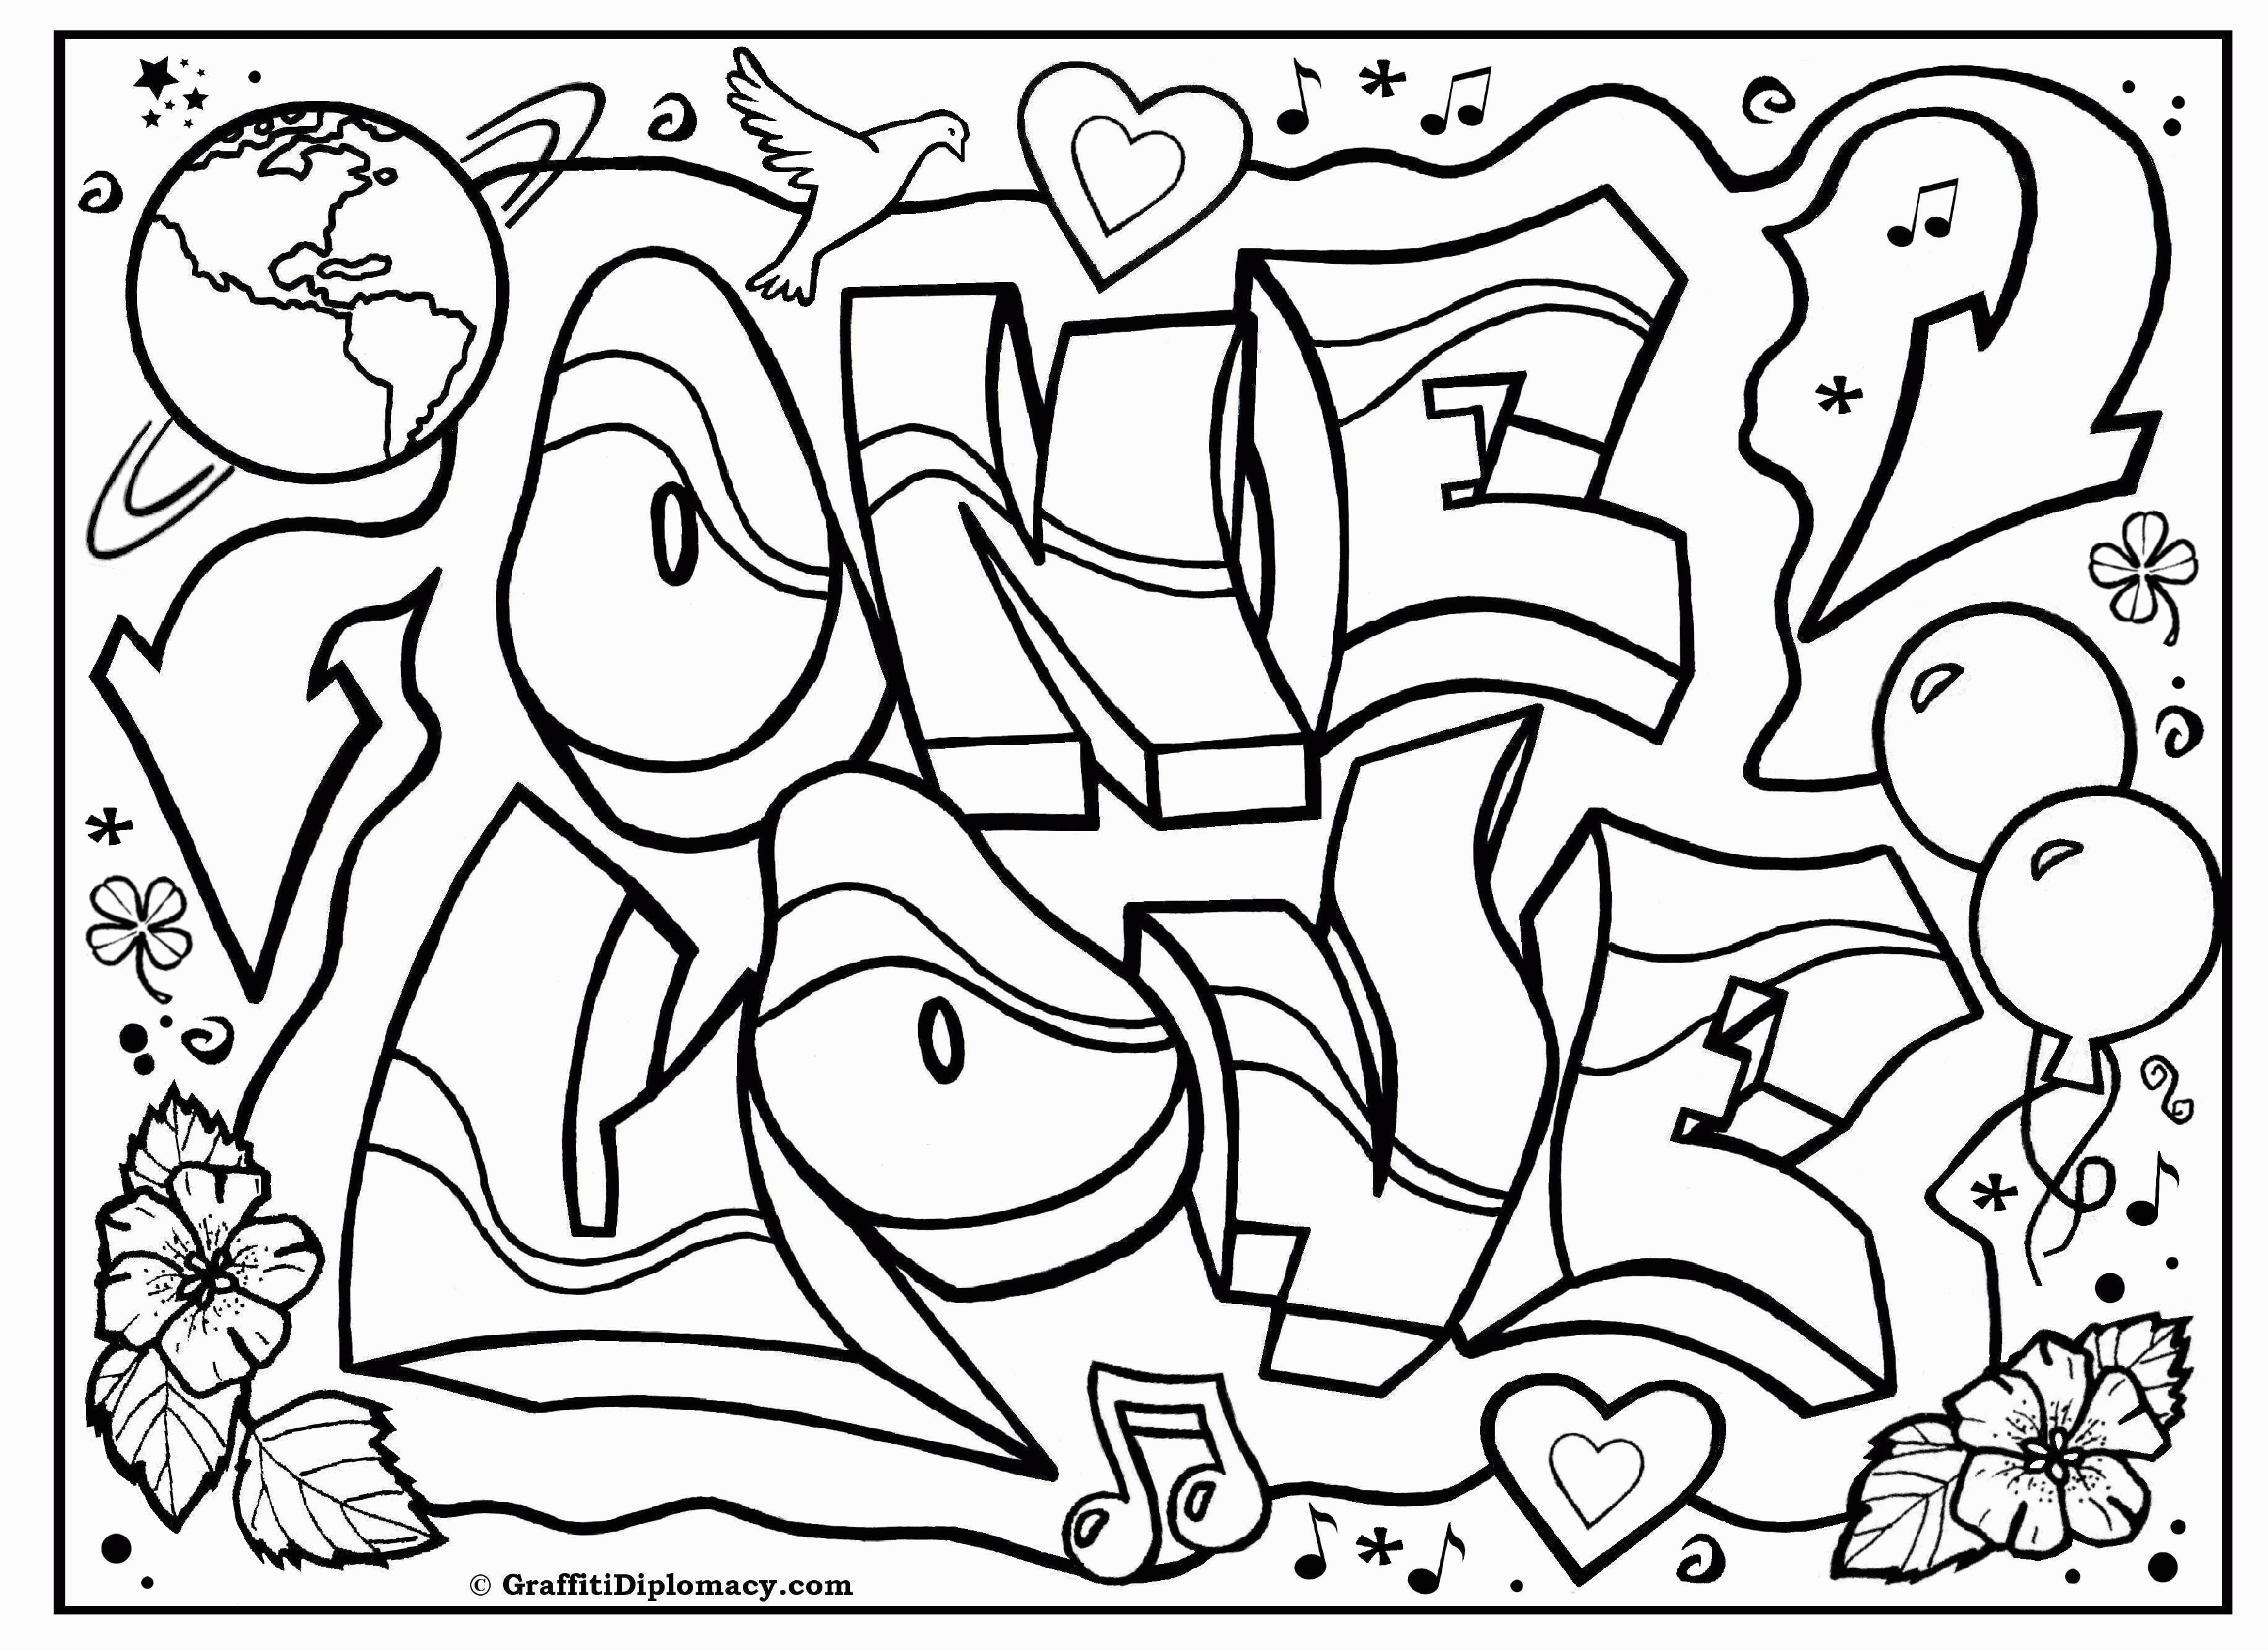 Other ~ Printable Coloring Pages for Teenagers Graffiti ~ Coloring ...